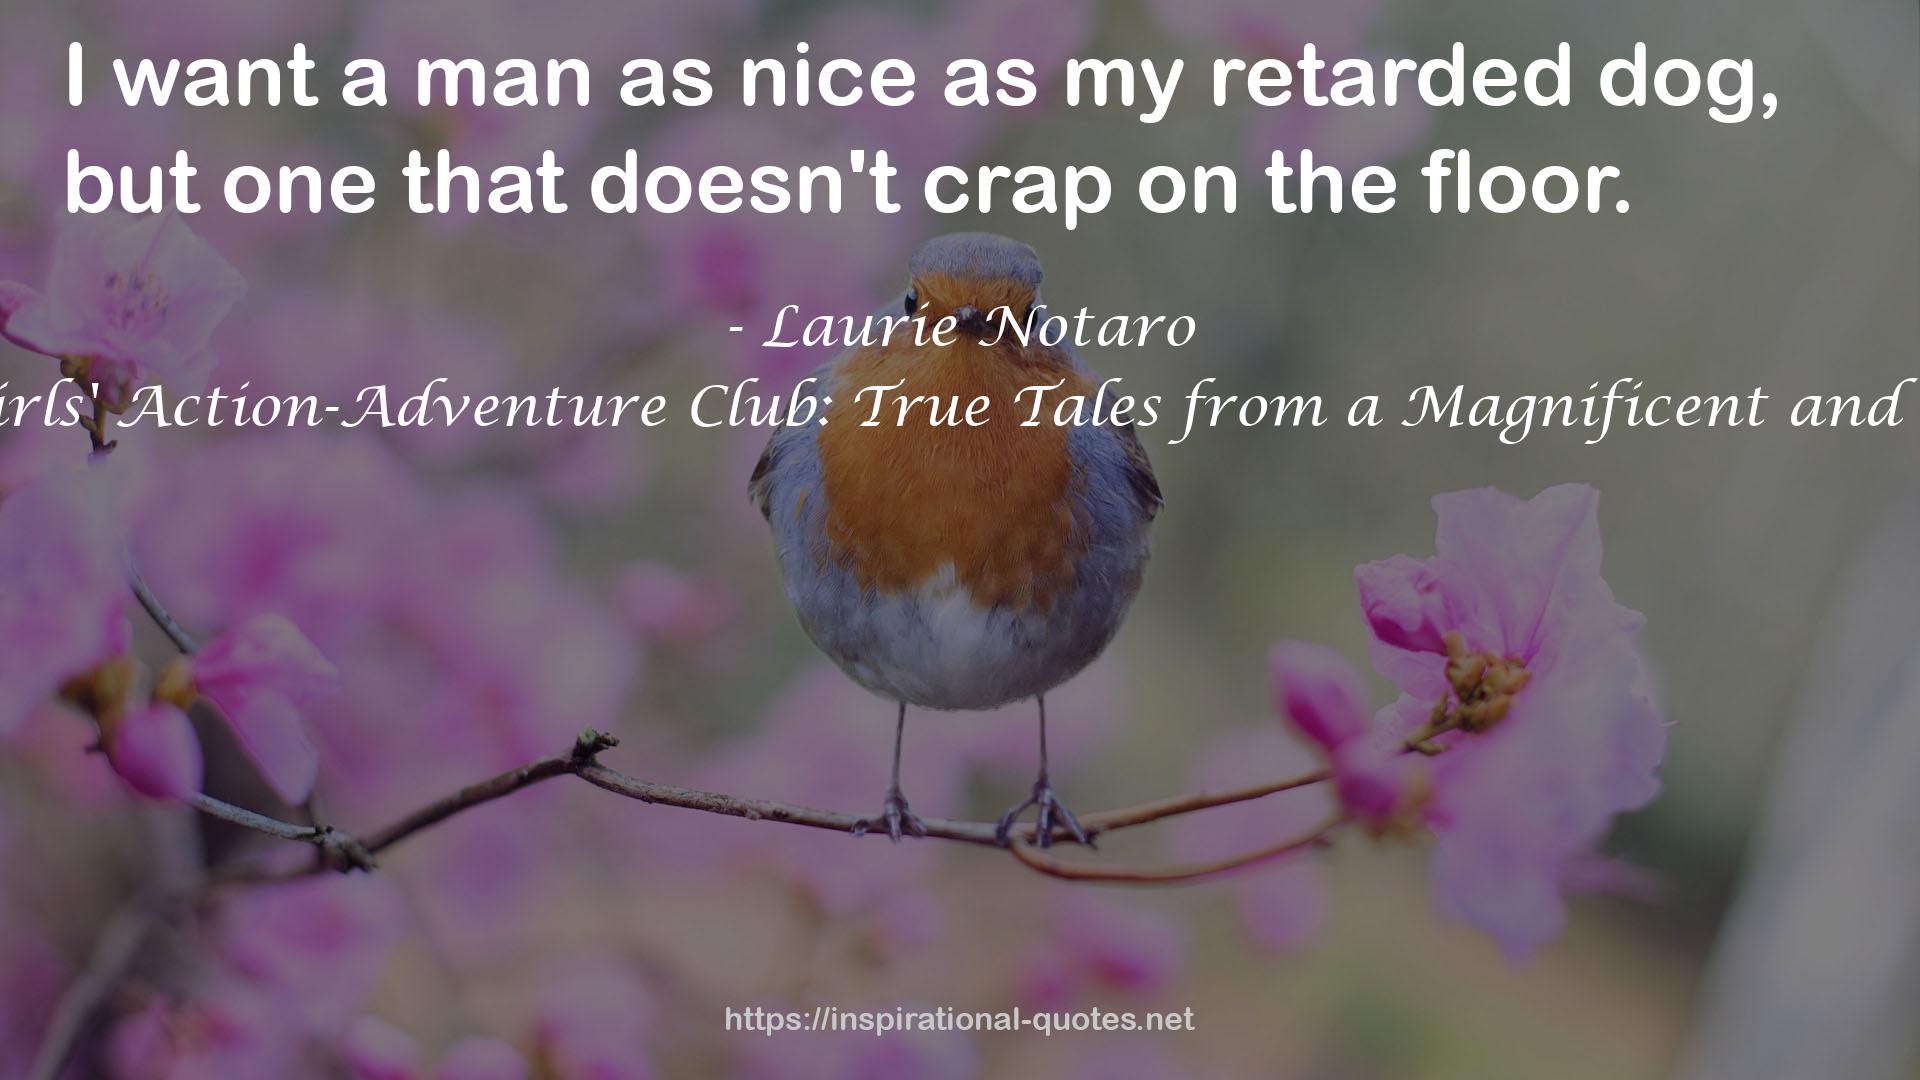 The Idiot Girls' Action-Adventure Club: True Tales from a Magnificent and Clumsy Life QUOTES